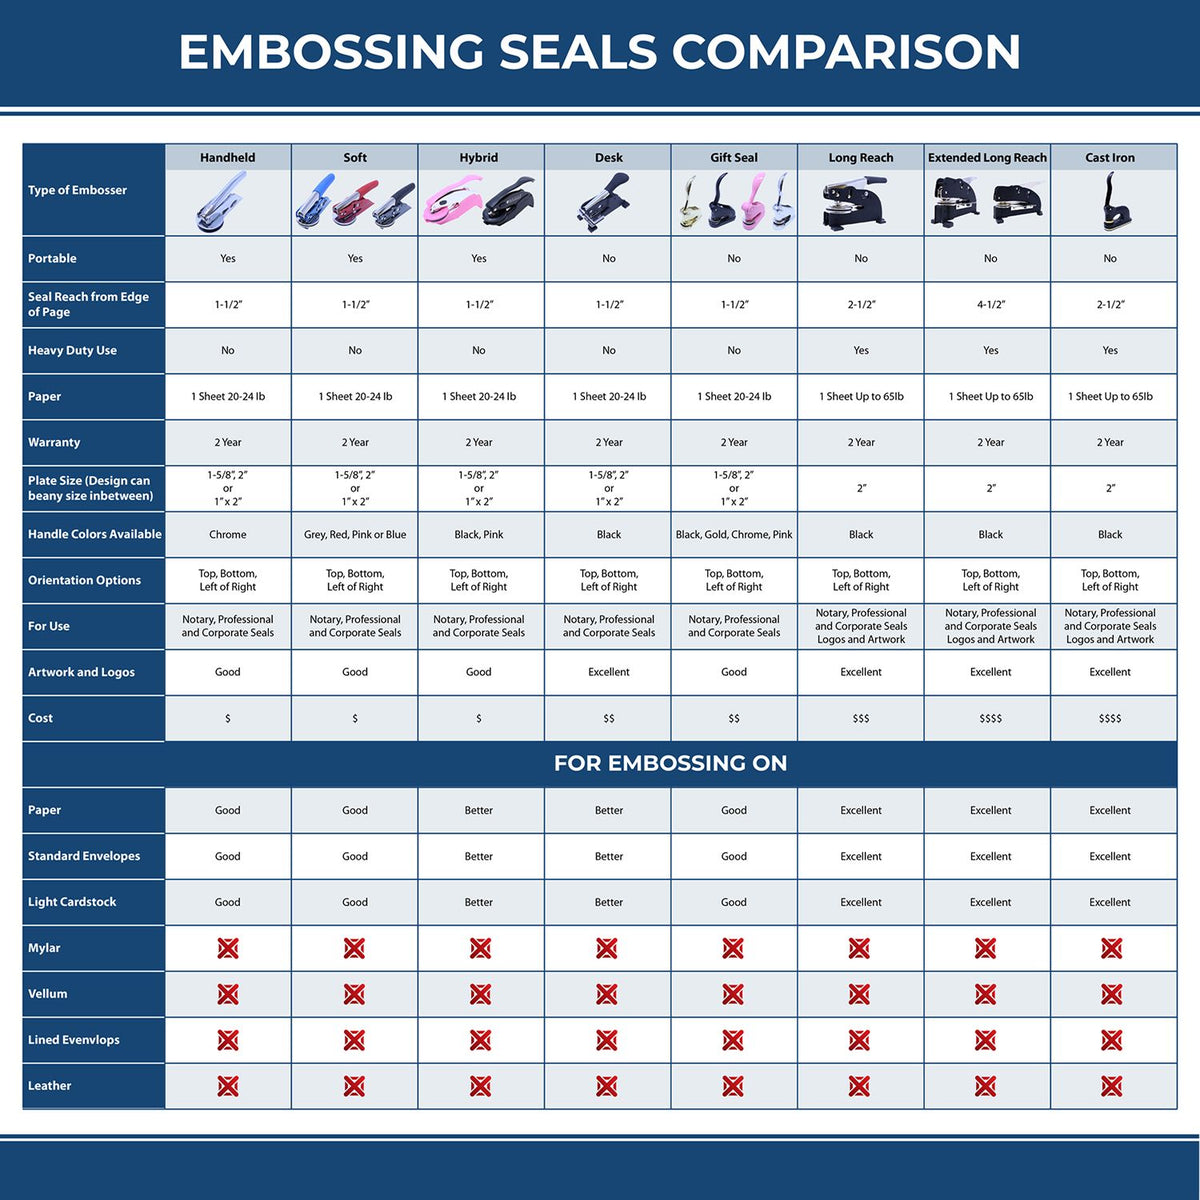 A comparison chart for the different types of mount models available for the Heavy Duty Cast Iron Arizona Engineer Seal Embosser.